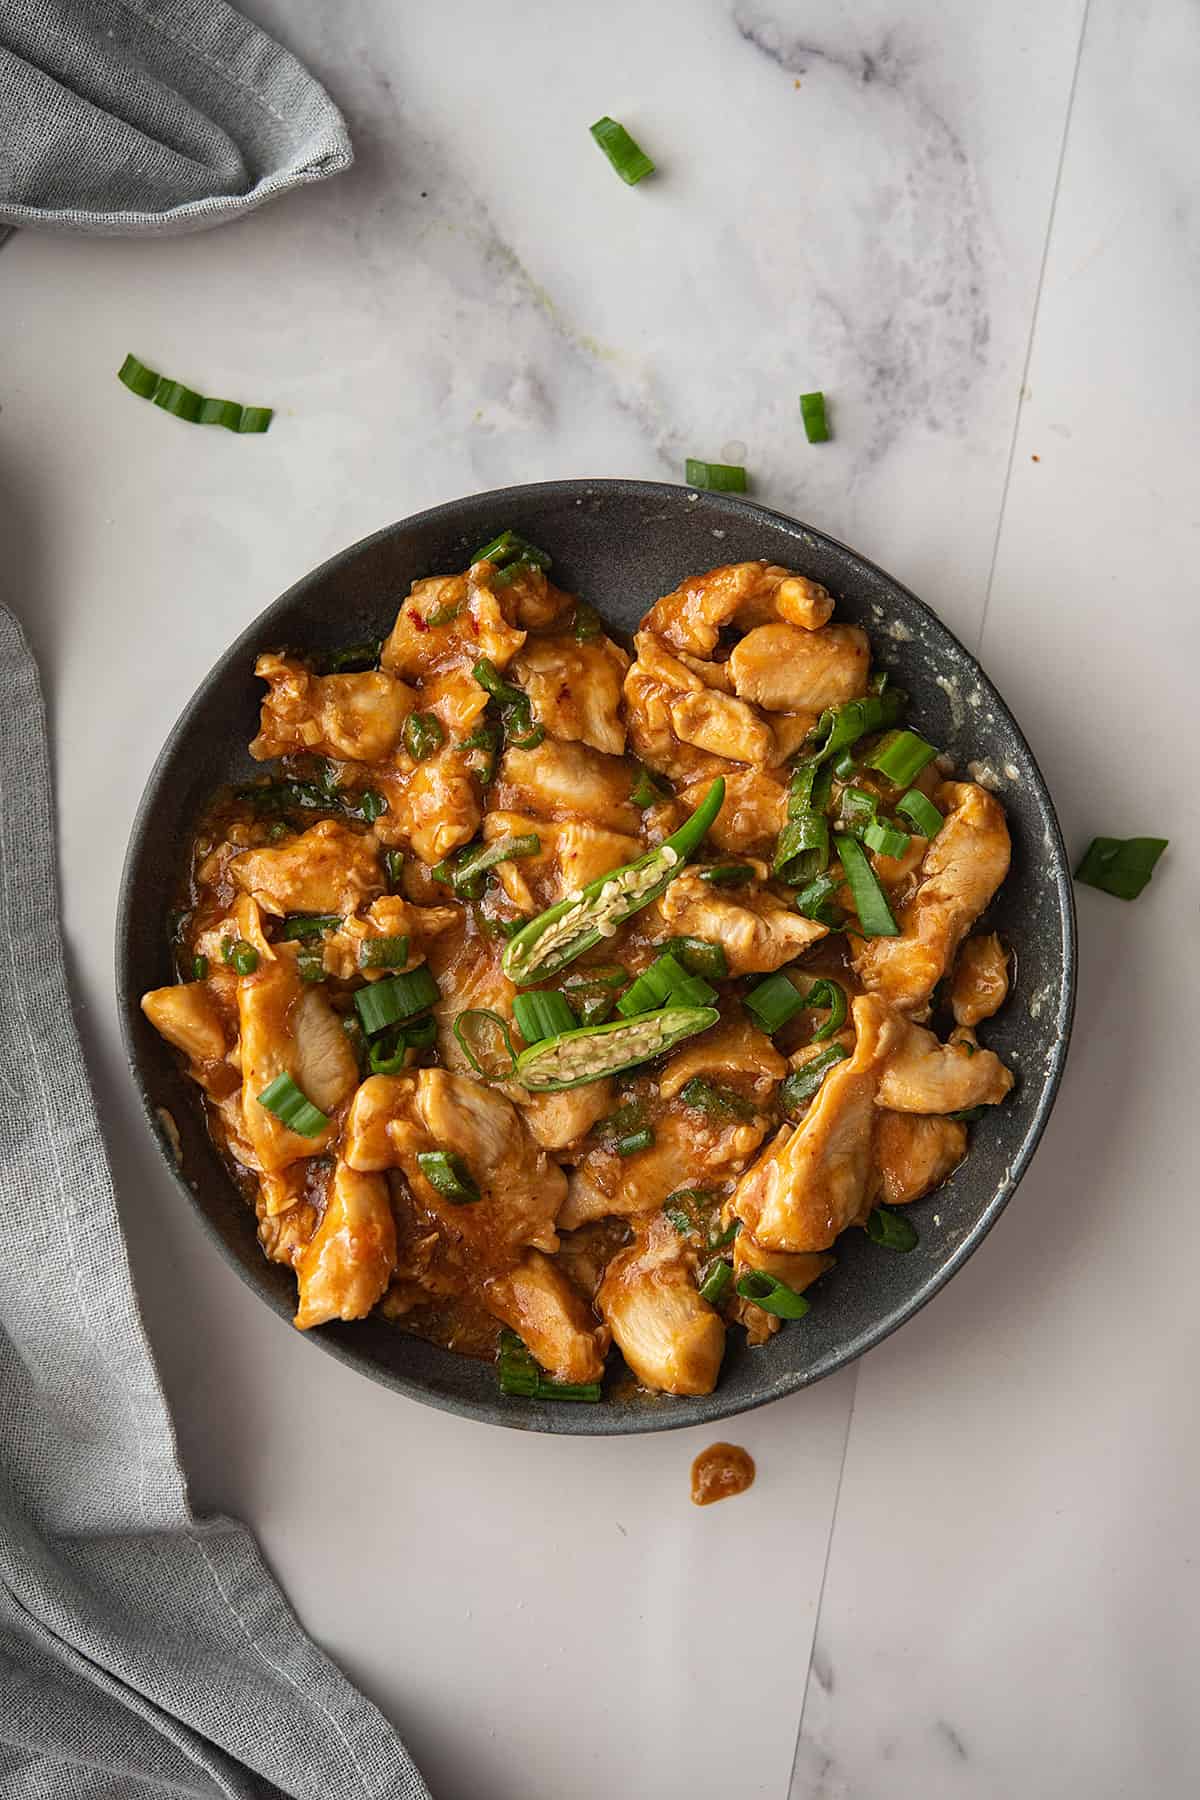 Try our hot and spicy Chinese chicken recipe for a delicious, fiery meal. Tender chicken, bold spices, and sauce make for a perfect dinner.